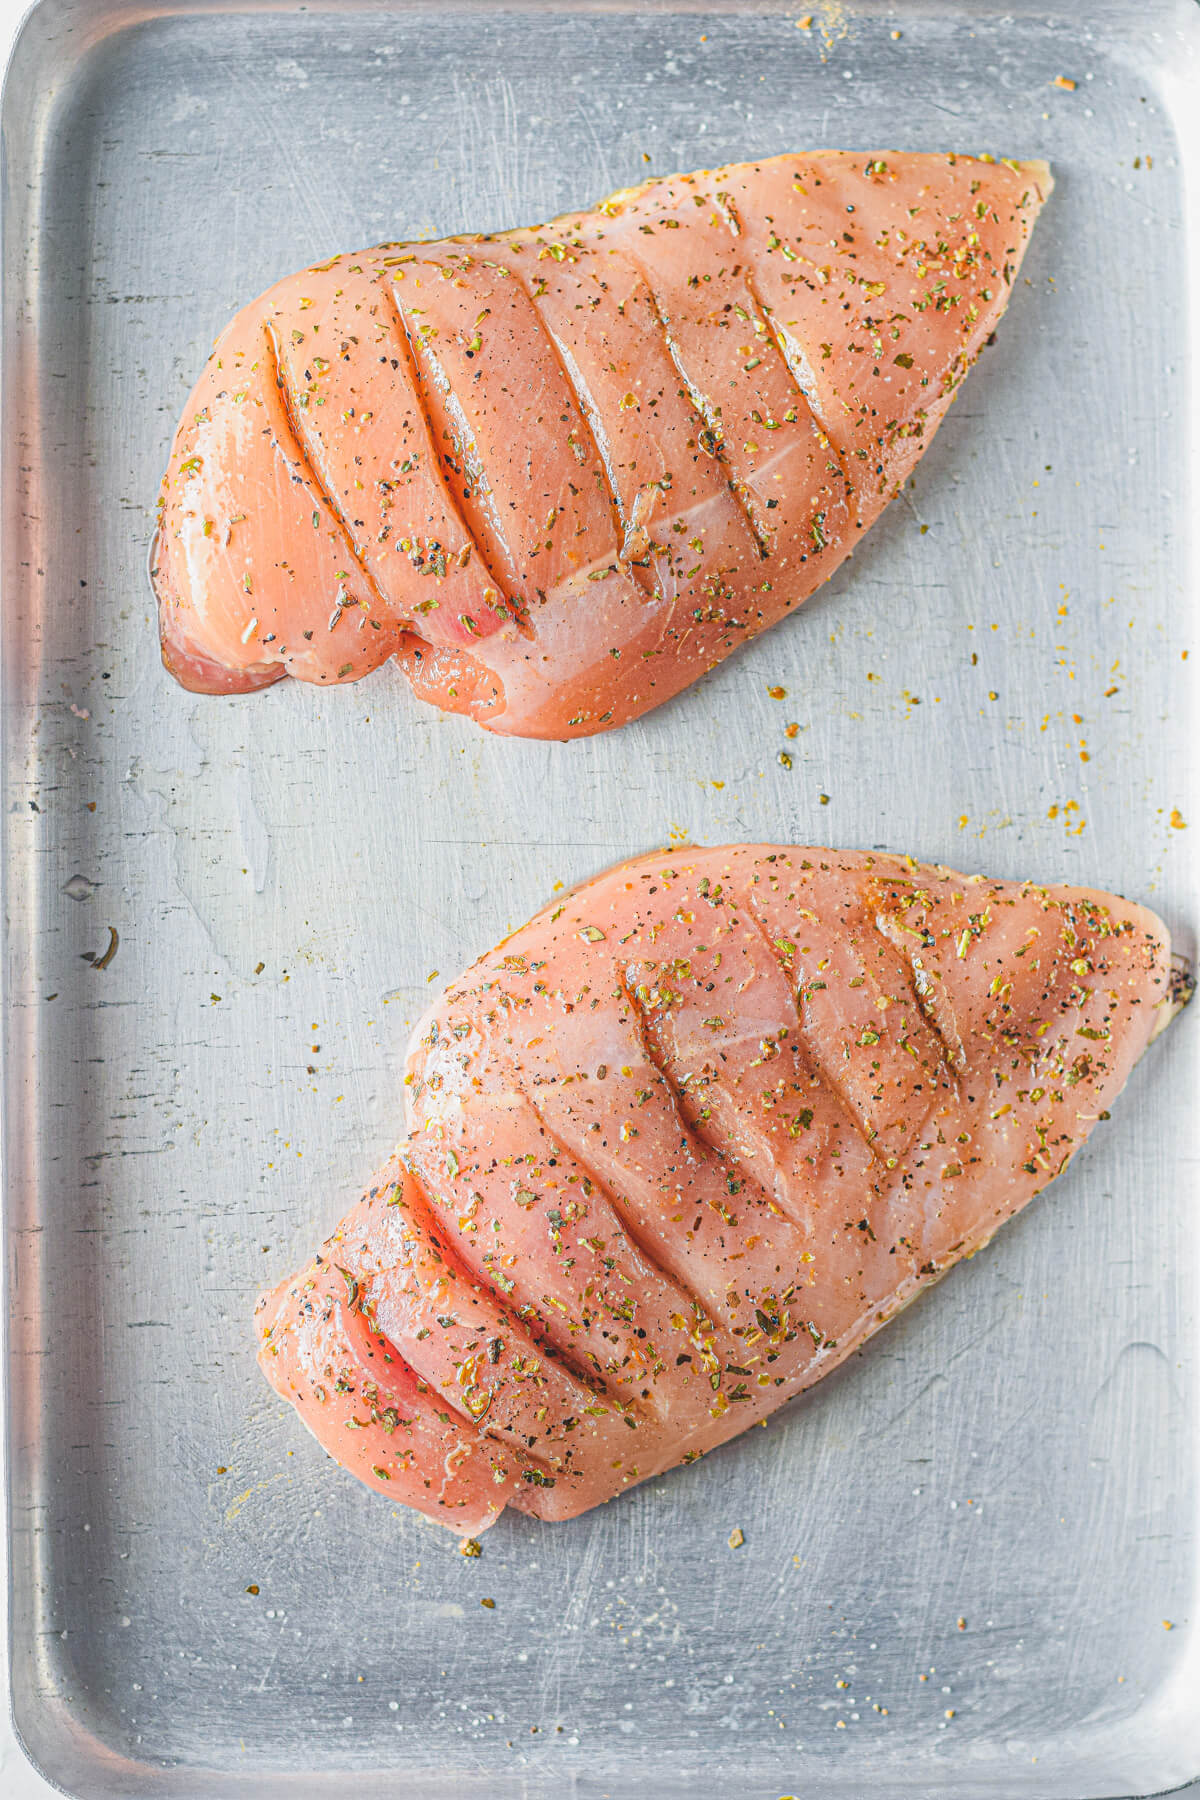 Two seasoned raw chicken breasts with slices along the top.